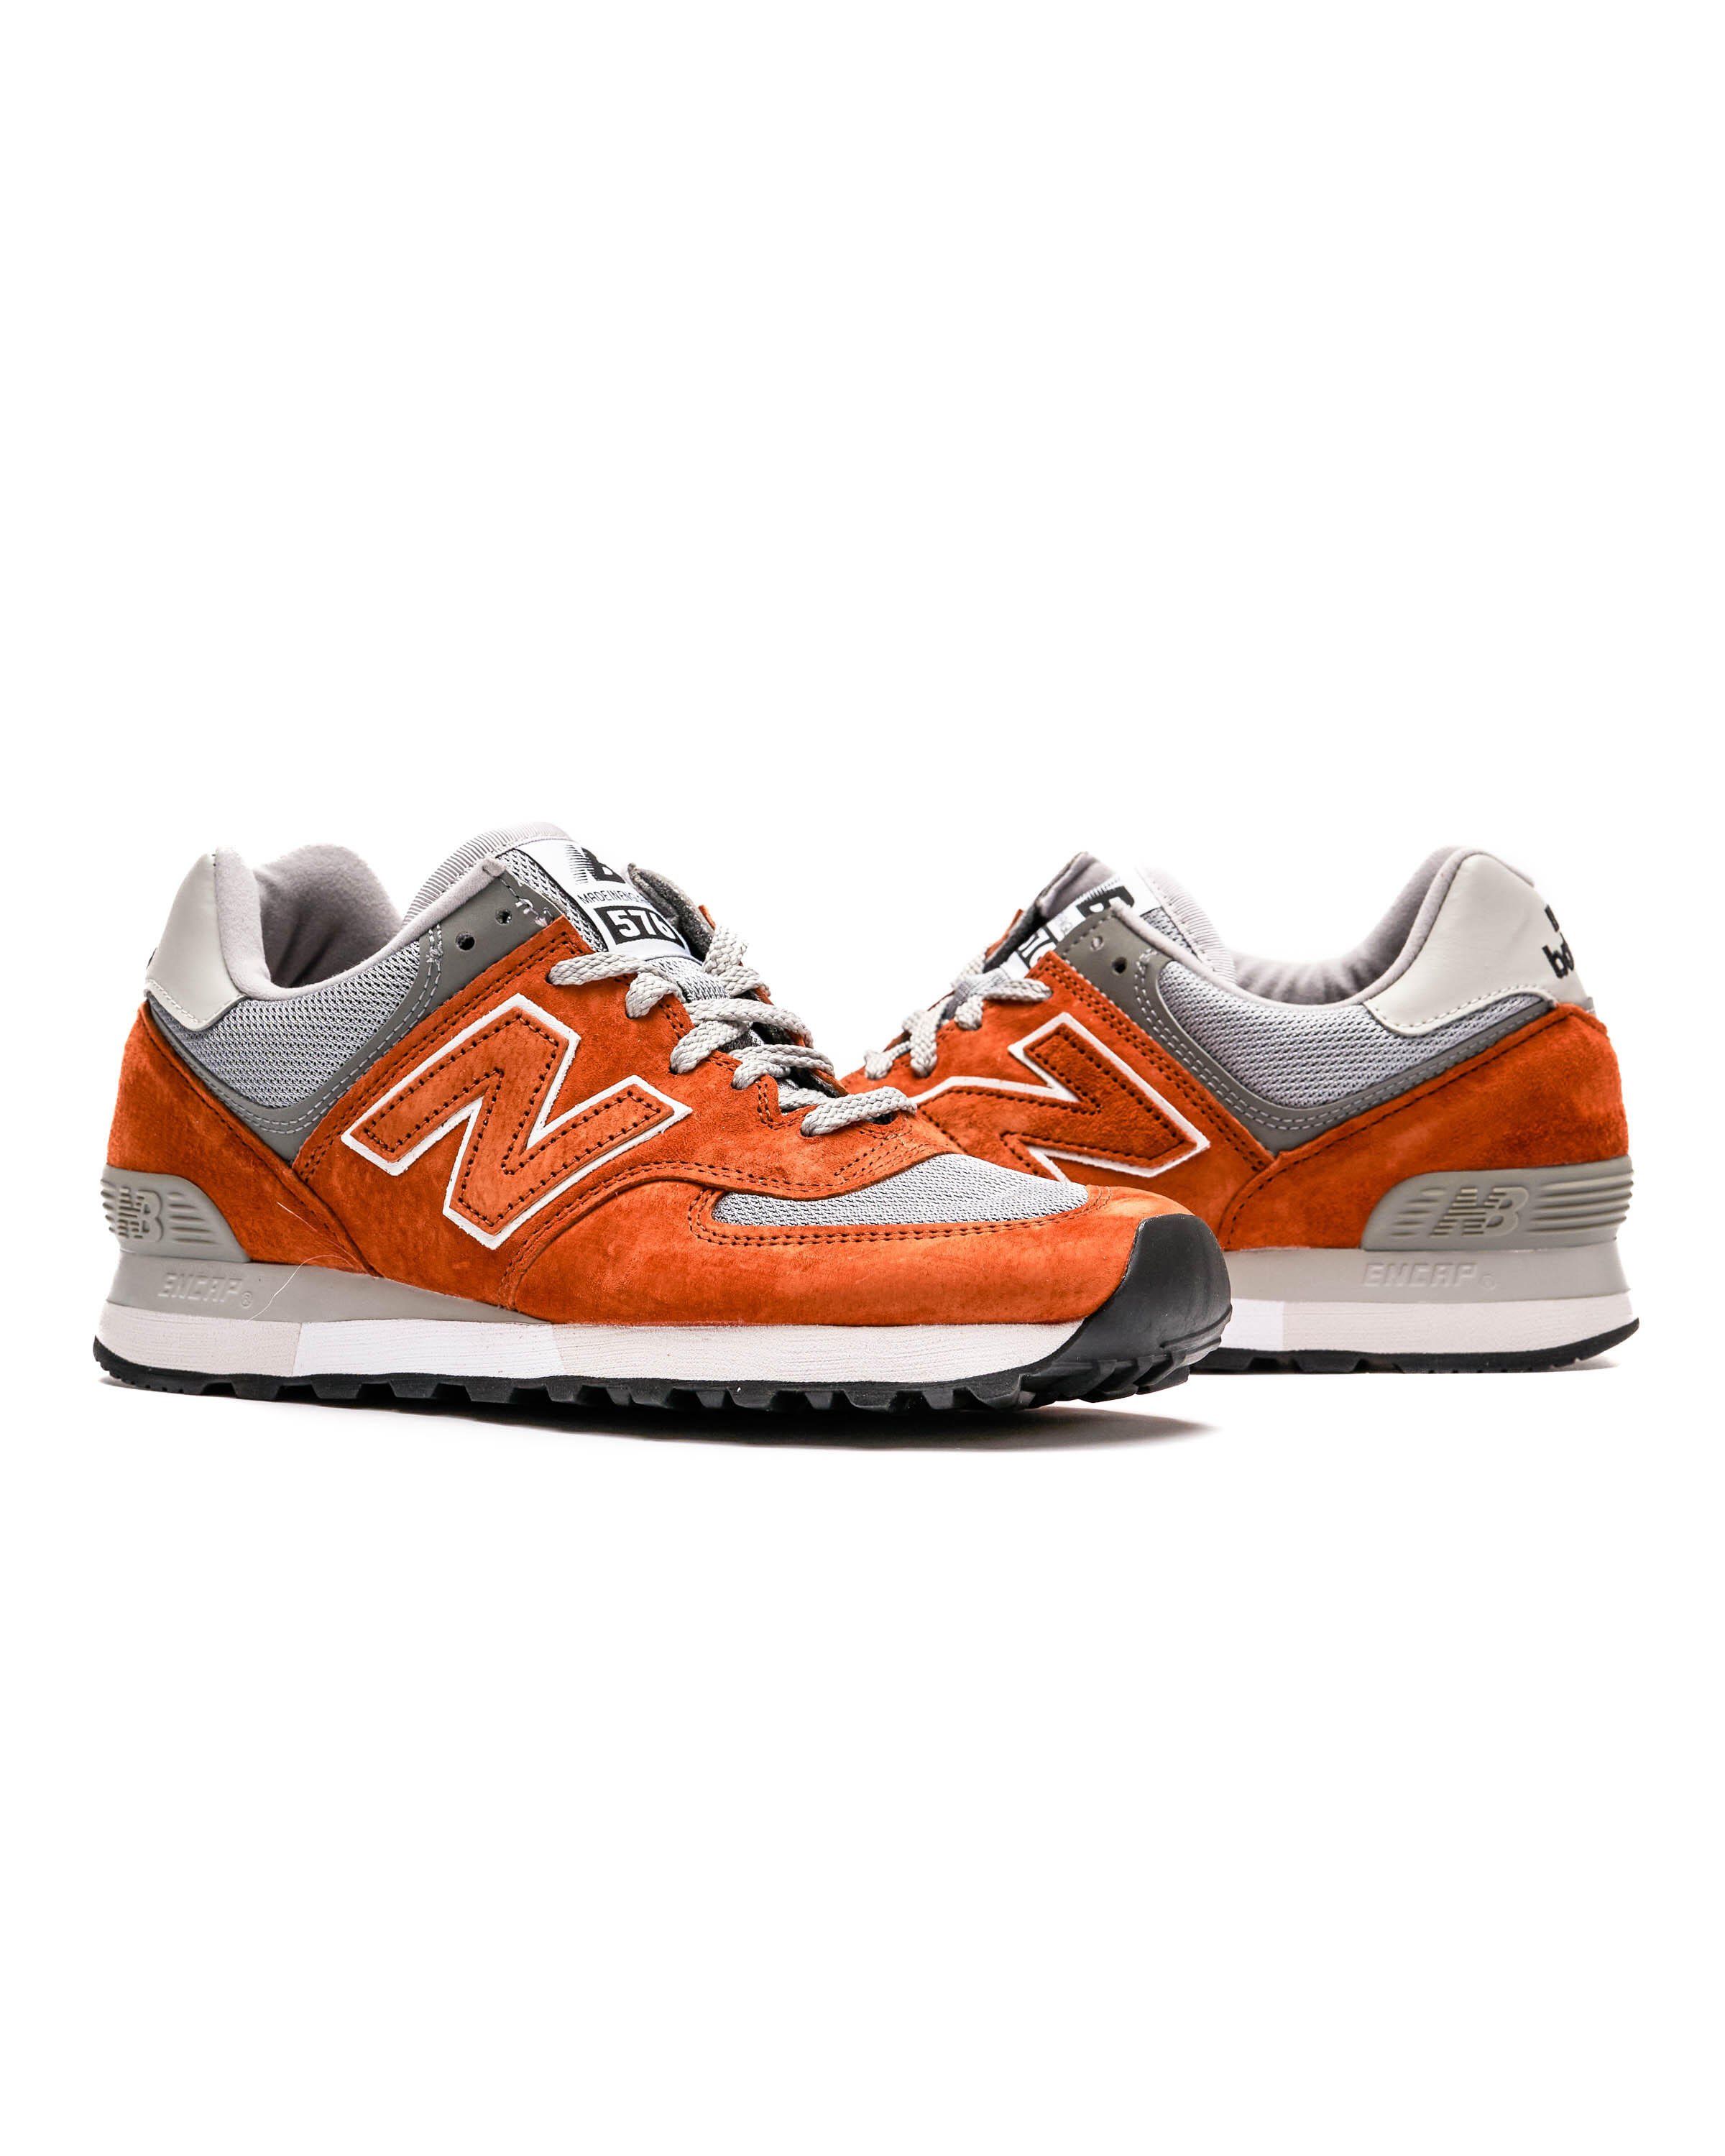 New Balance OU 576 OOK - Made in England